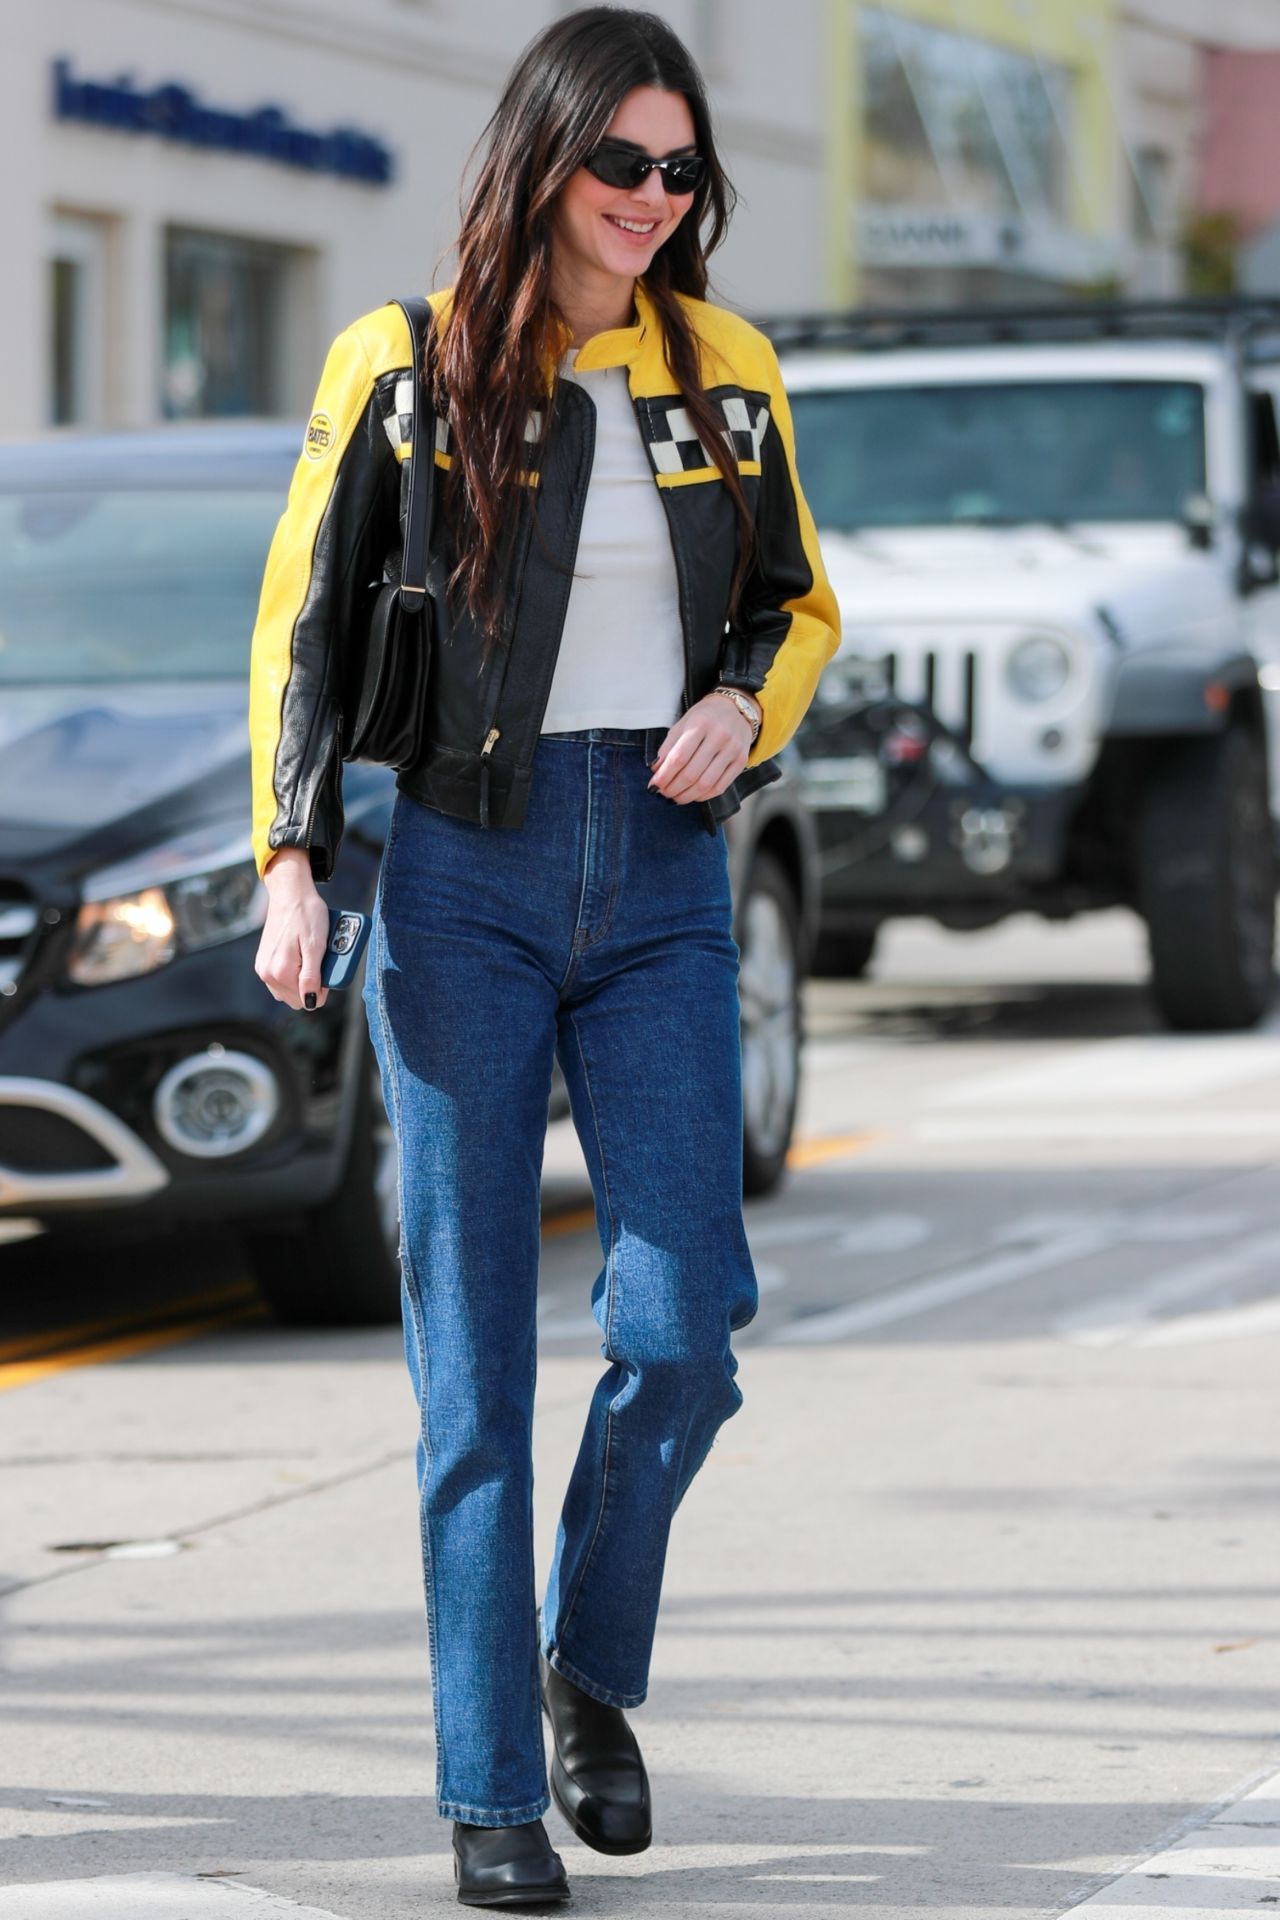 Kendall Jenner West Hollywood February 29, 2020 – Star Style